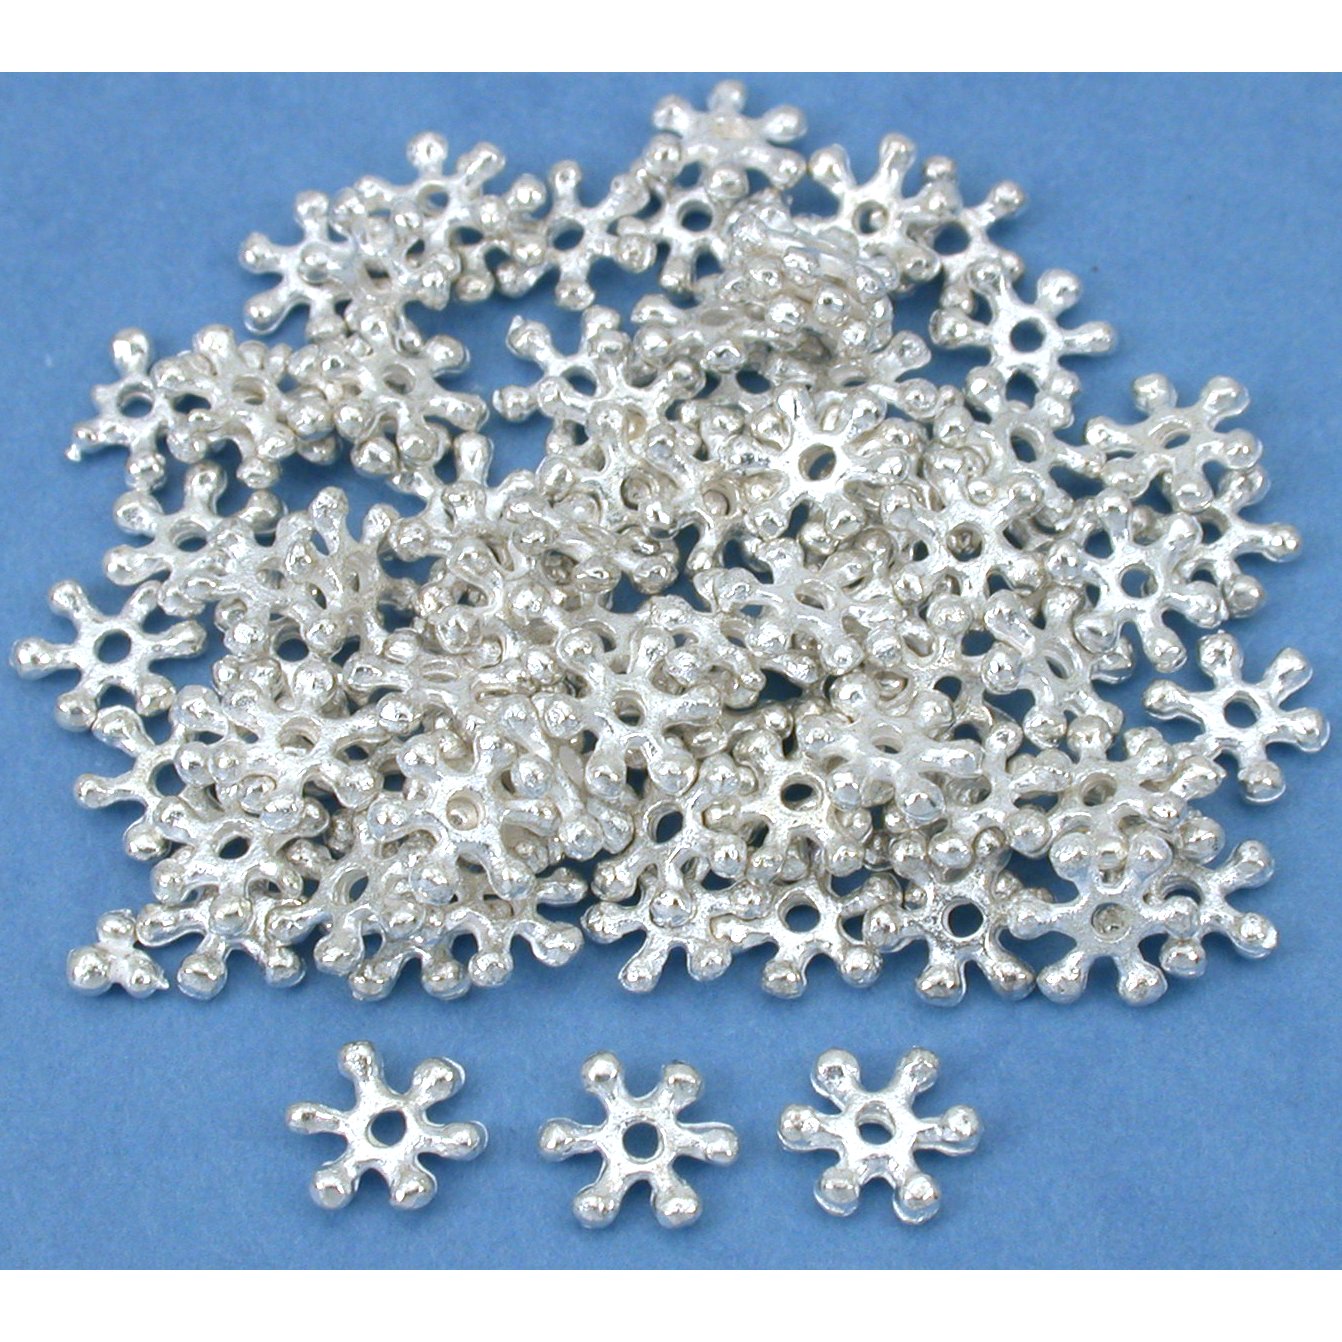 Bali Spacer Flower Beads Silver Plated 7mm 90Pcs Approx.